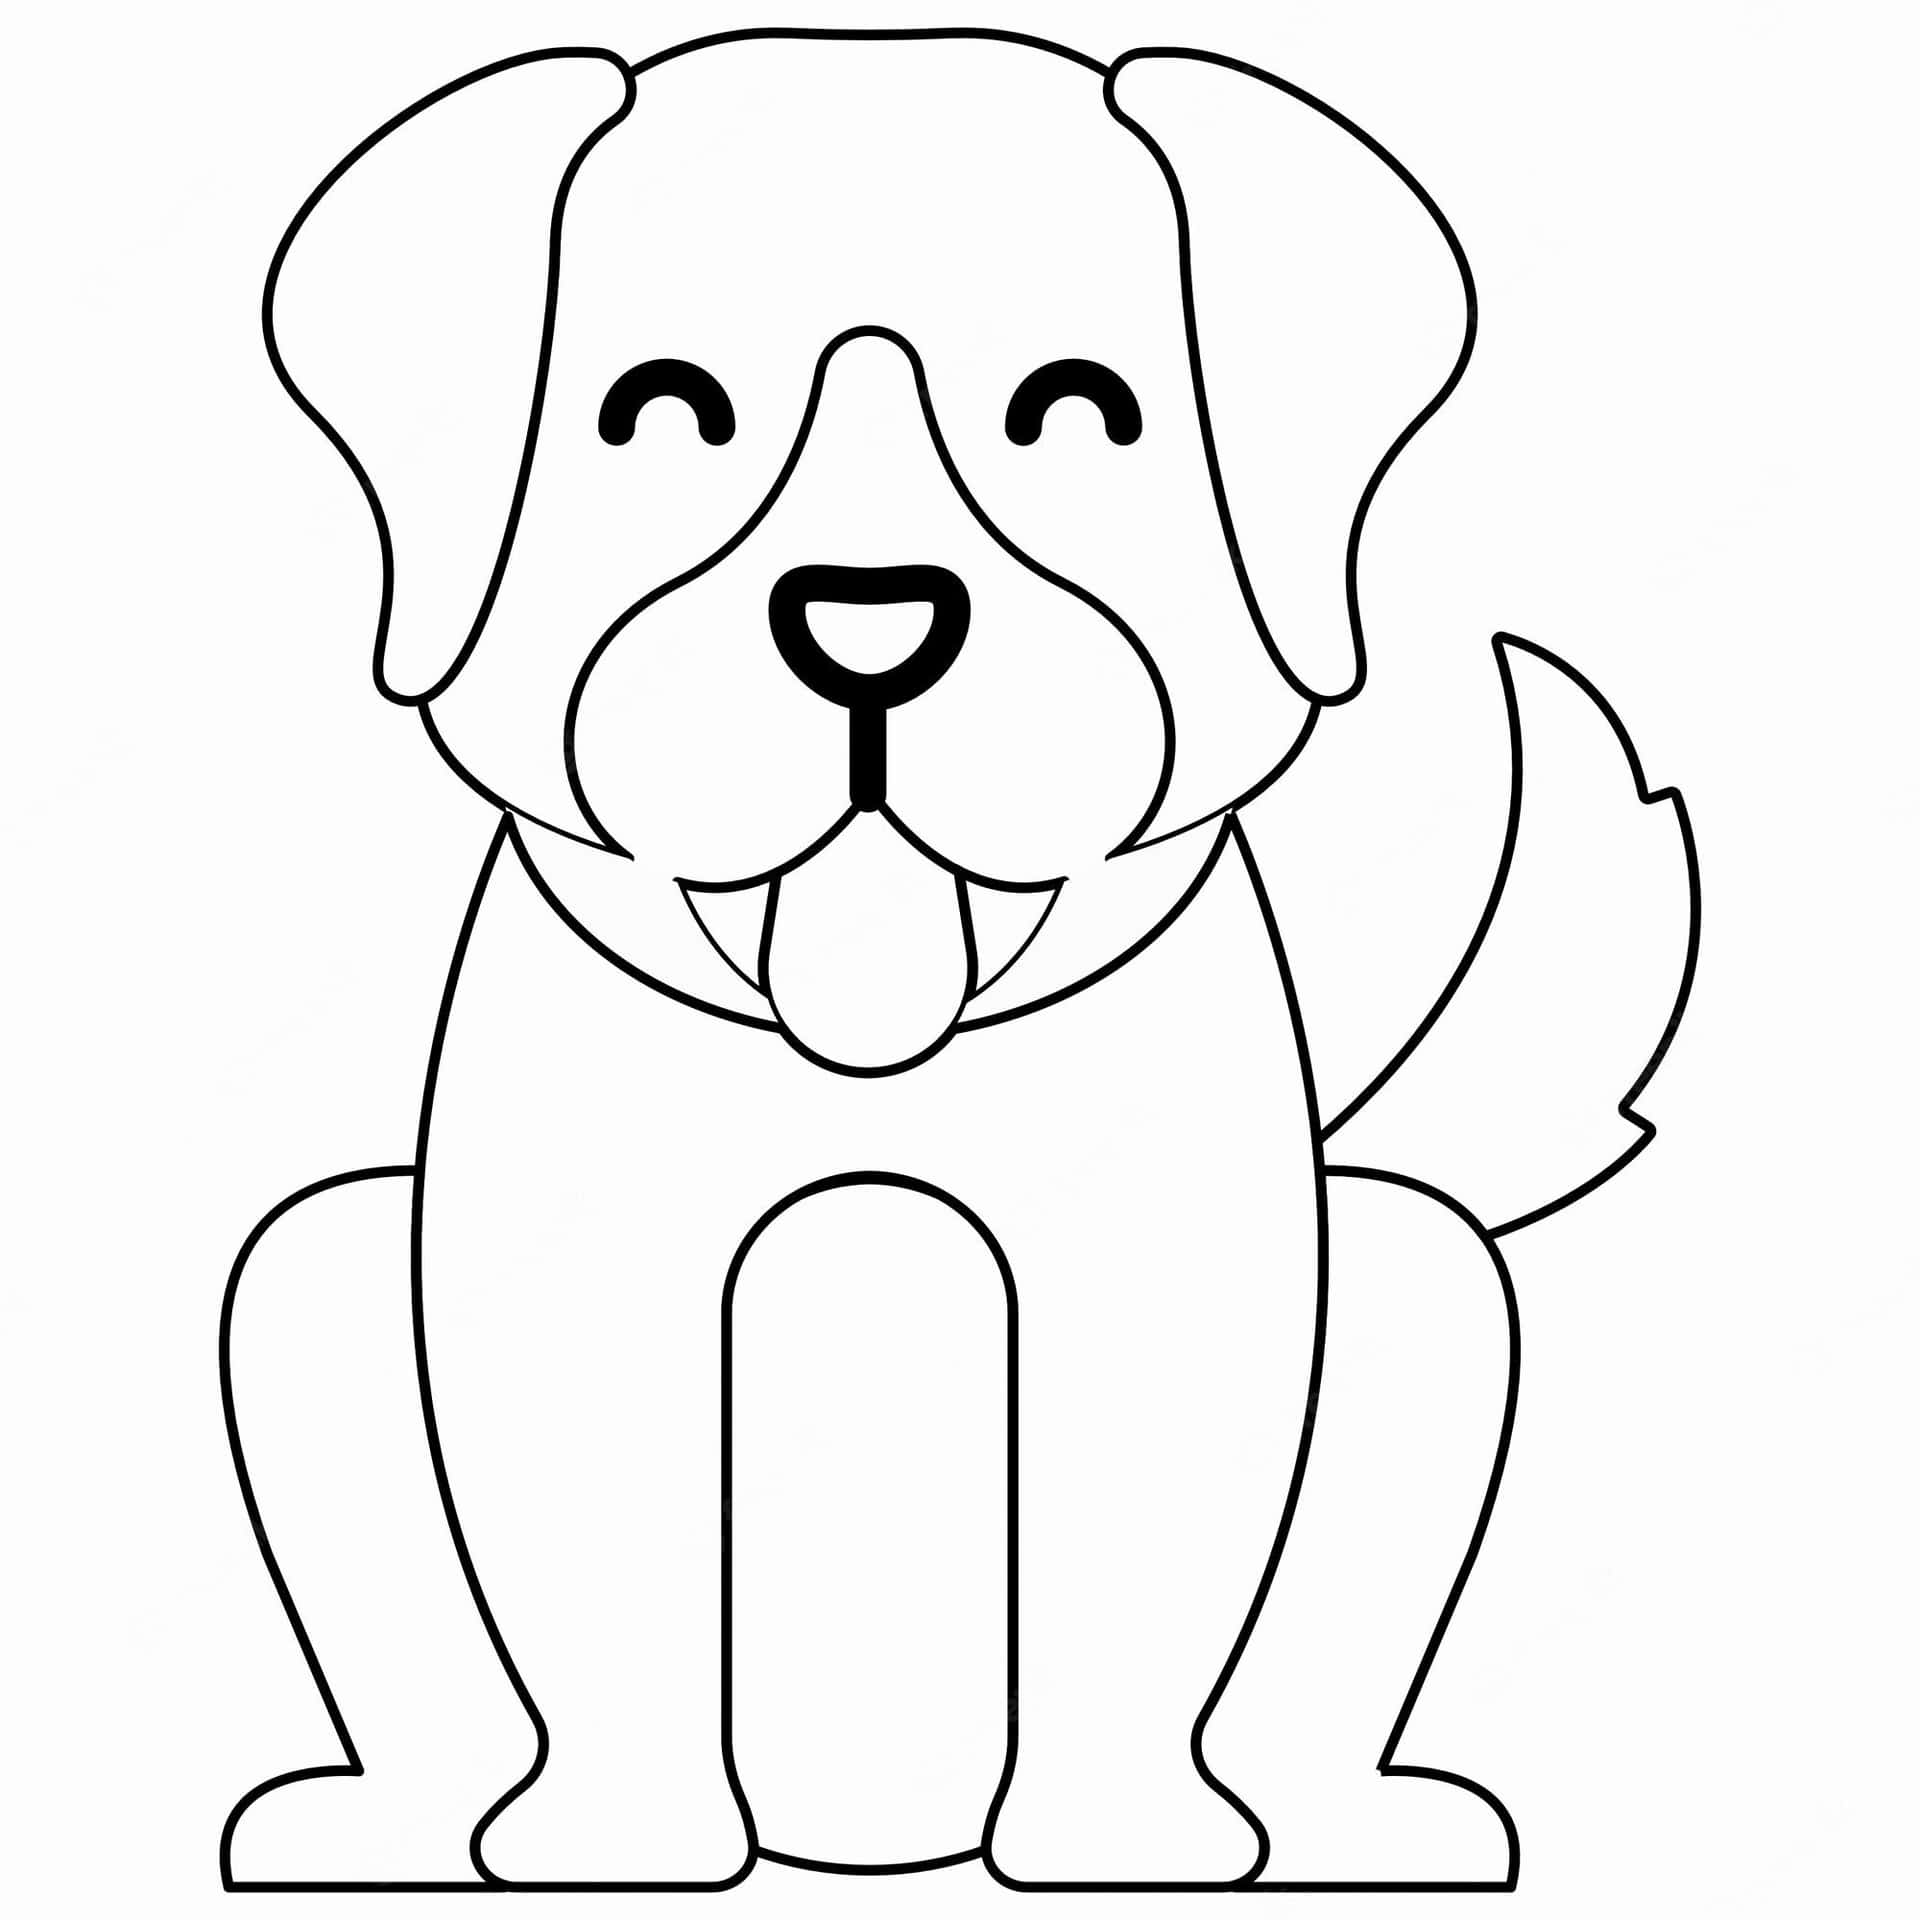 A Dog Coloring Page With A Tongue Sticking Out